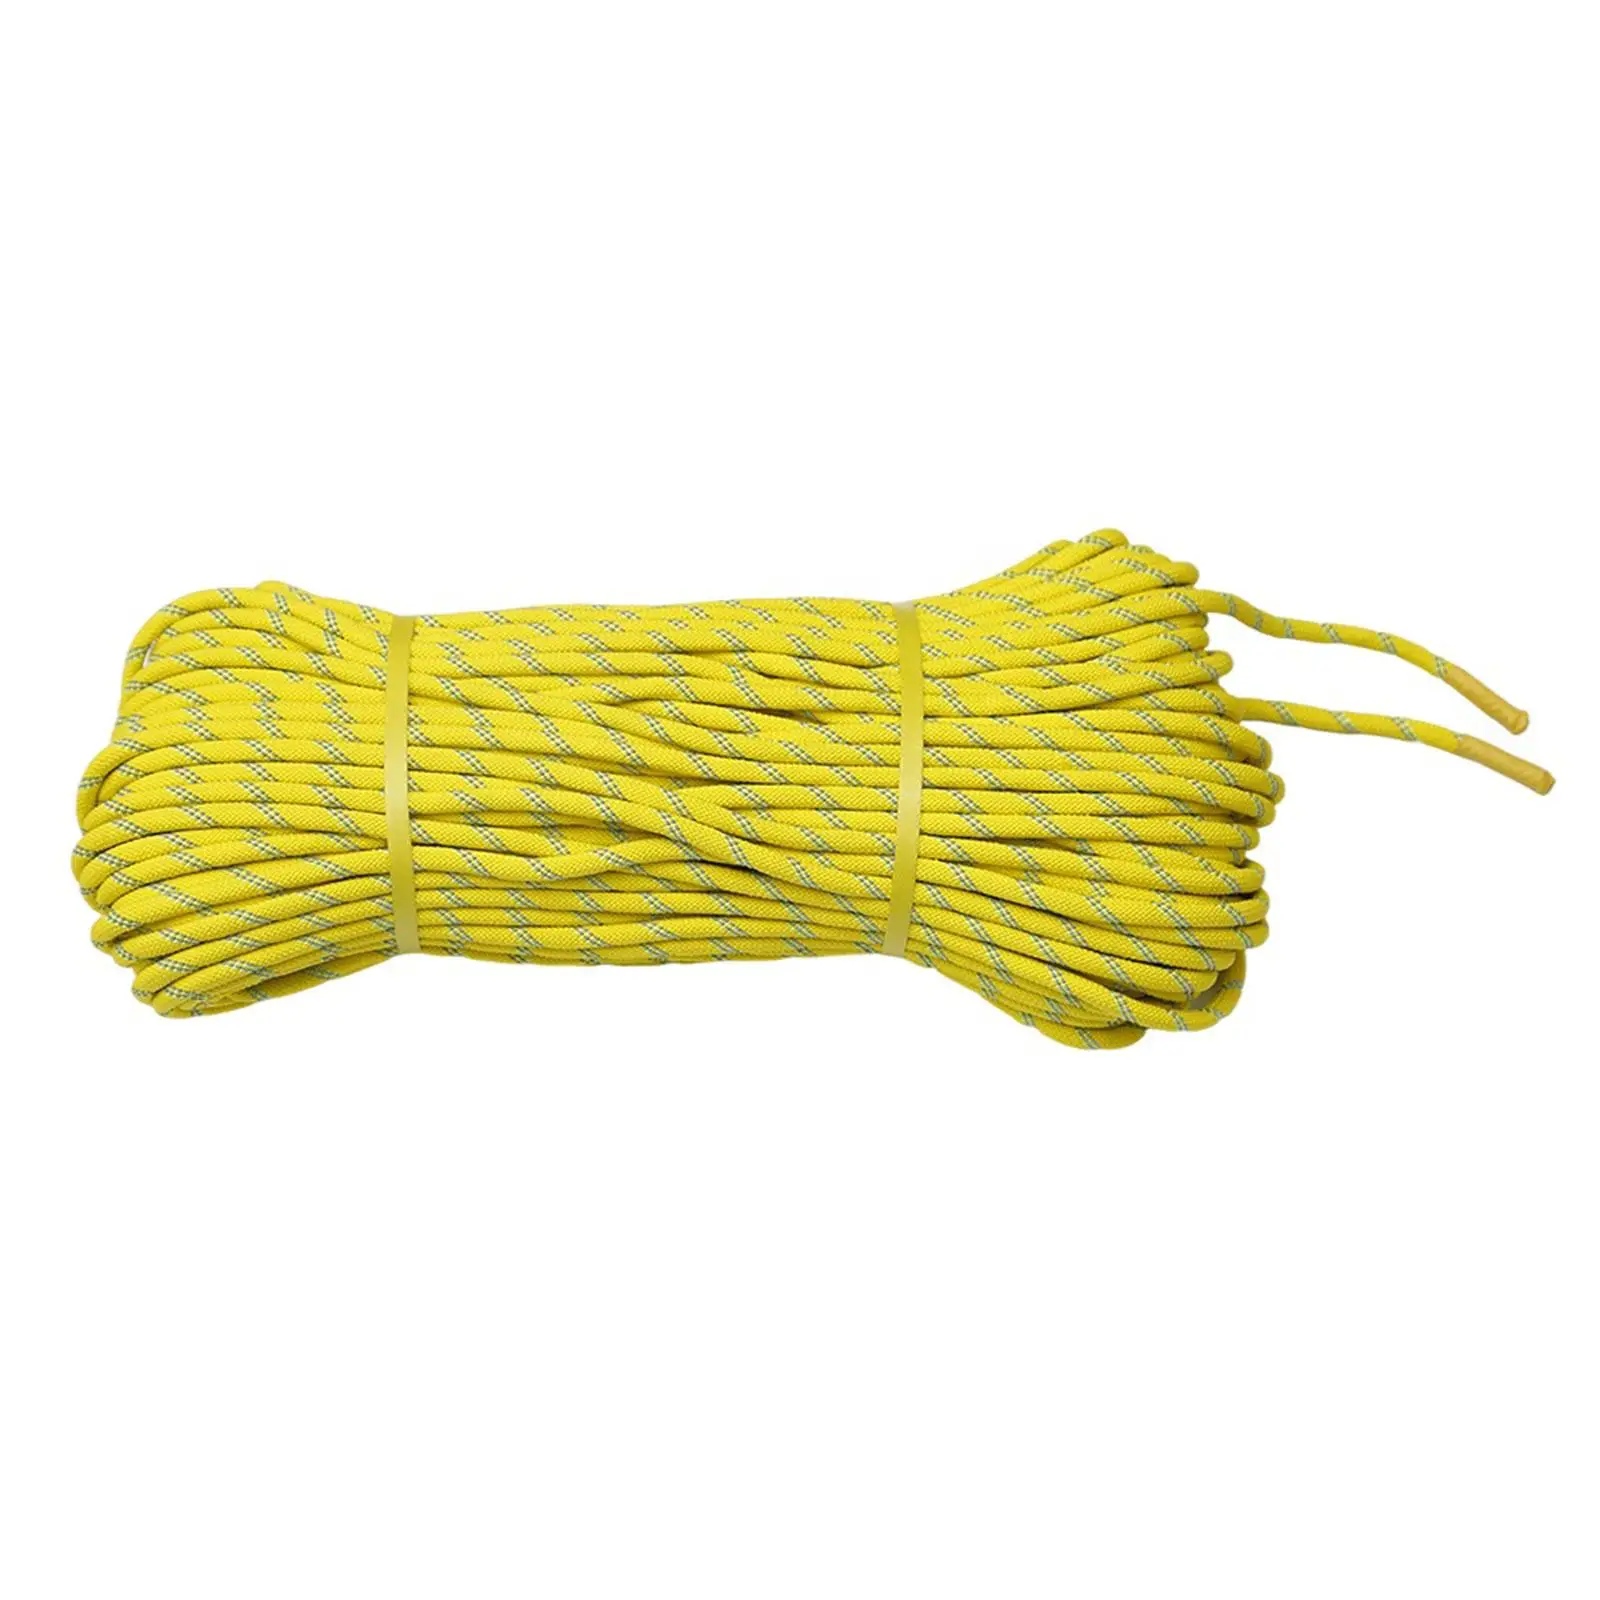 30M Floating Rope Accessory Flotation Device High Visibility Throwable Rope for Outdoor Fishing Kayaking Boating Buoyant Dinghy